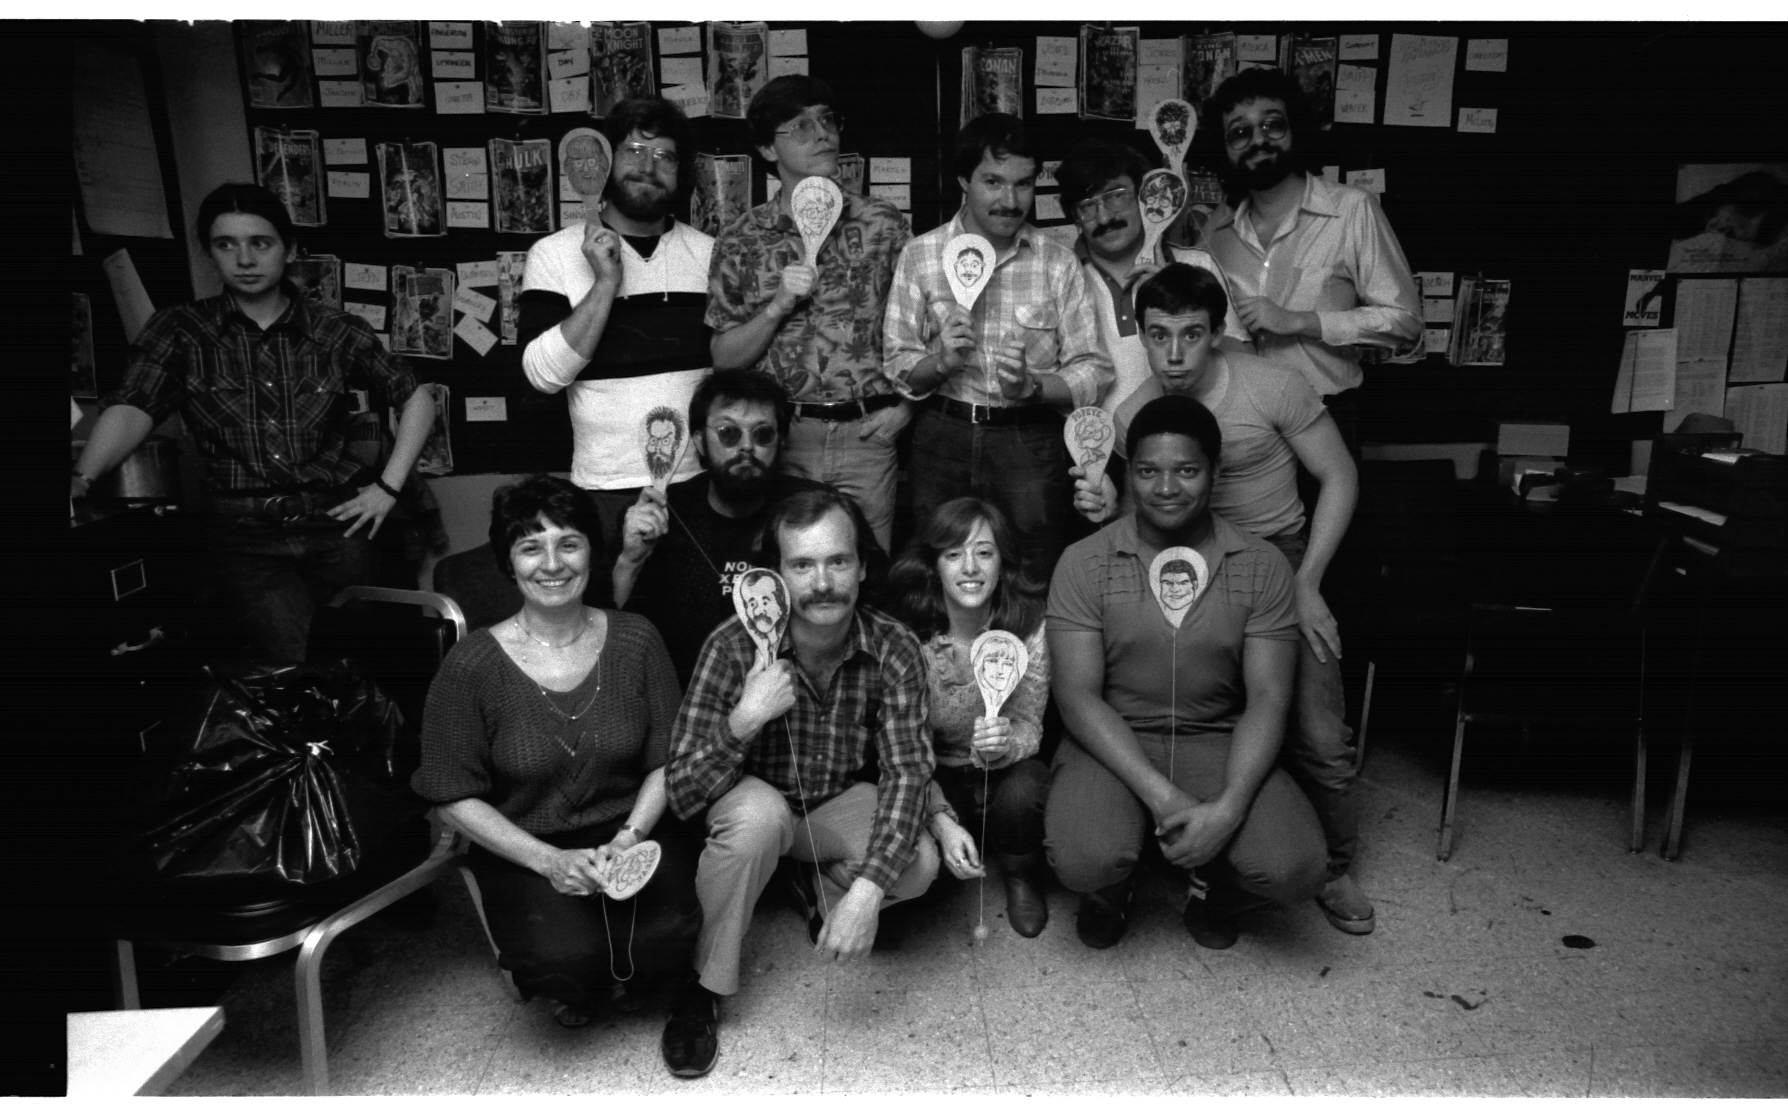 The All-Winners Squad! The Only Annual Wack-Offs comes to a thrilling close. No one knows who that Intern is at extreme Left, sorry. Back row: Ron Zalme, Mike Carlin, Joe Albelo, Tom DeFalco, Jim Salicrup. Middle-ish row: Rick Parker and Jack Morelli. Bottom row: Virginia Romita, Mark Gruenwald, Linda Florio and Lance Tooks. Congratulations all!